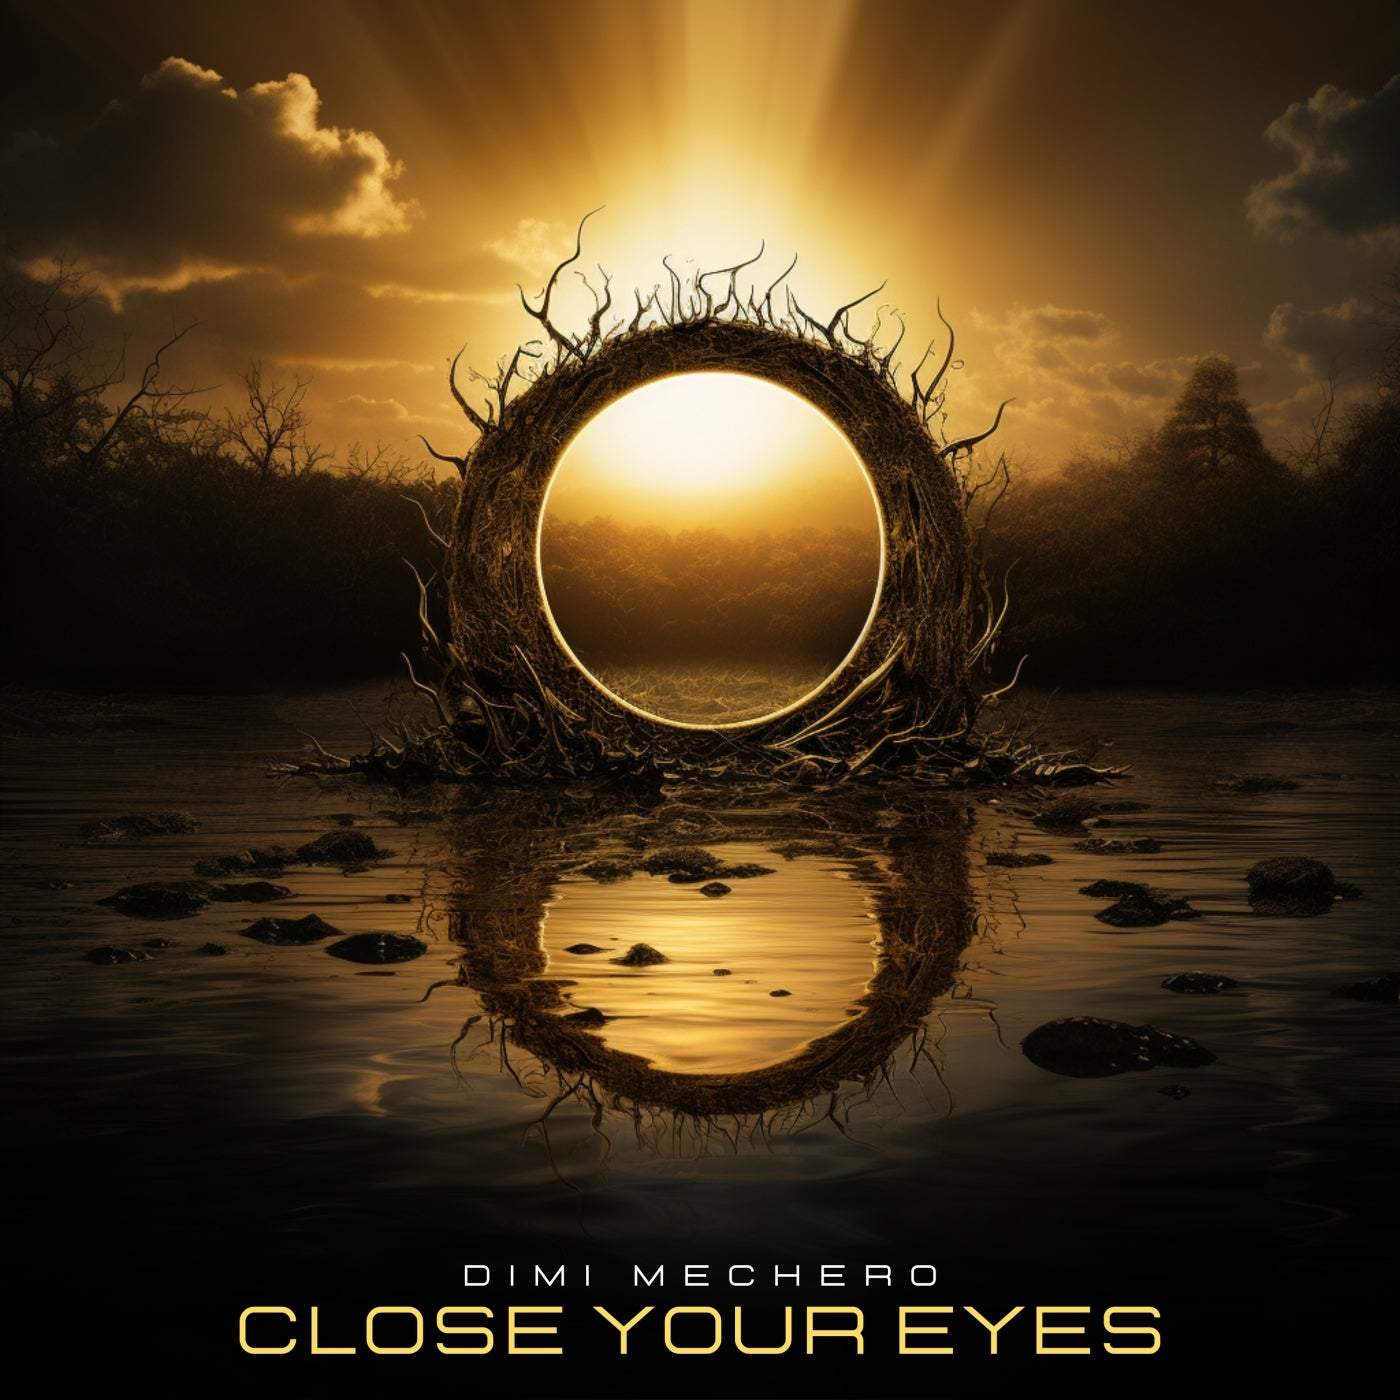 image cover: Dimi Mechero - Close Your Eyes on Hollystone Records